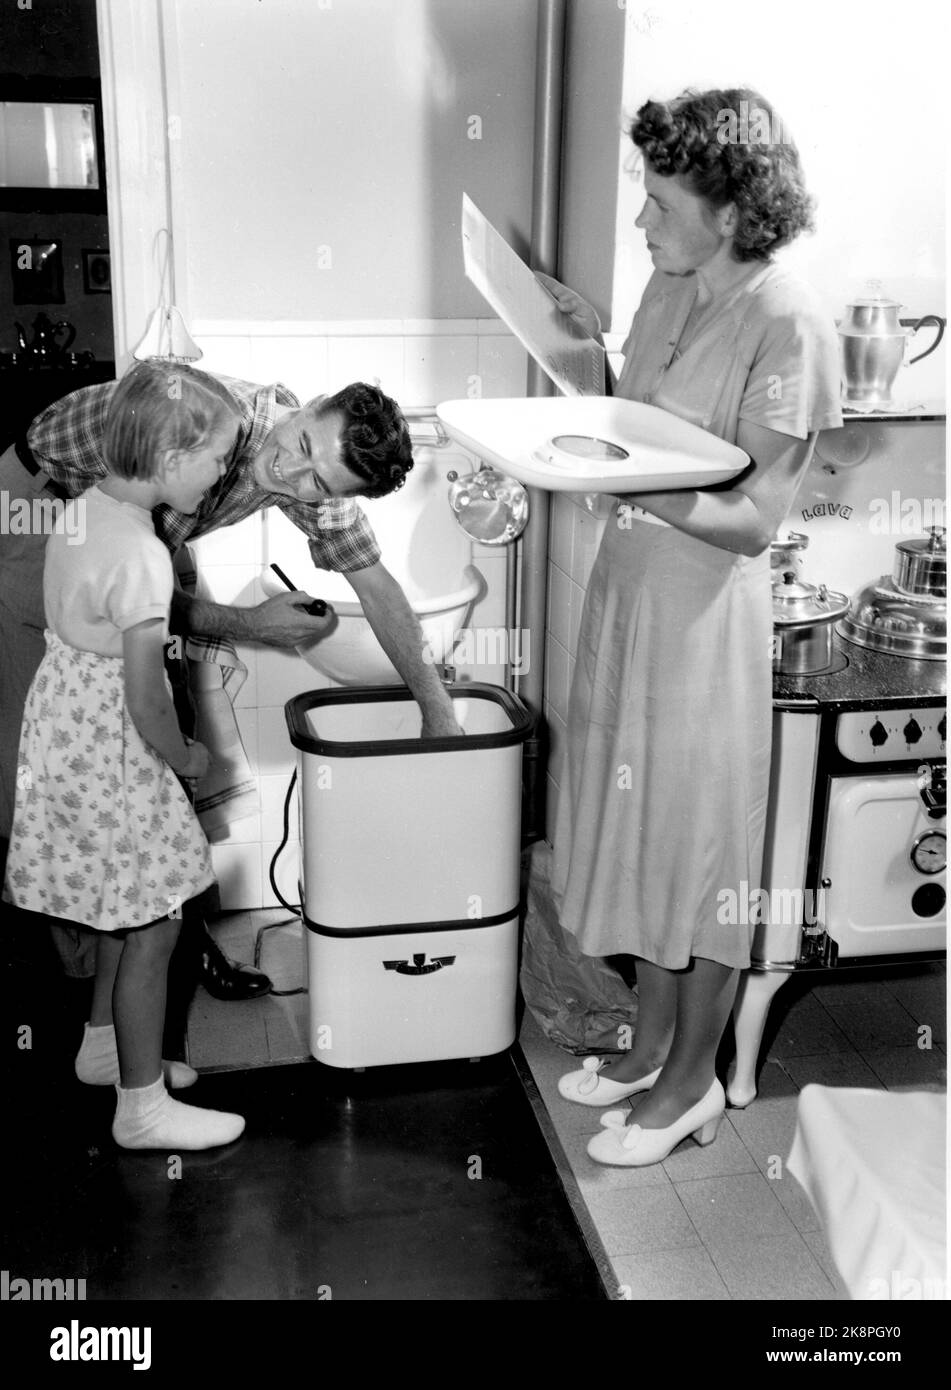 1951. From daily life in Norway after World War II. 'The washing machine comes'. End of scouring and sink - the new -fashioned washing machine of the brand into the kitchen. At the Gulbrandsen family in Ørengata 11 in Drammen. They will illustrate a typical Norwegian average family in the 1950s. Stock Photo NTB / Current Stock Photo